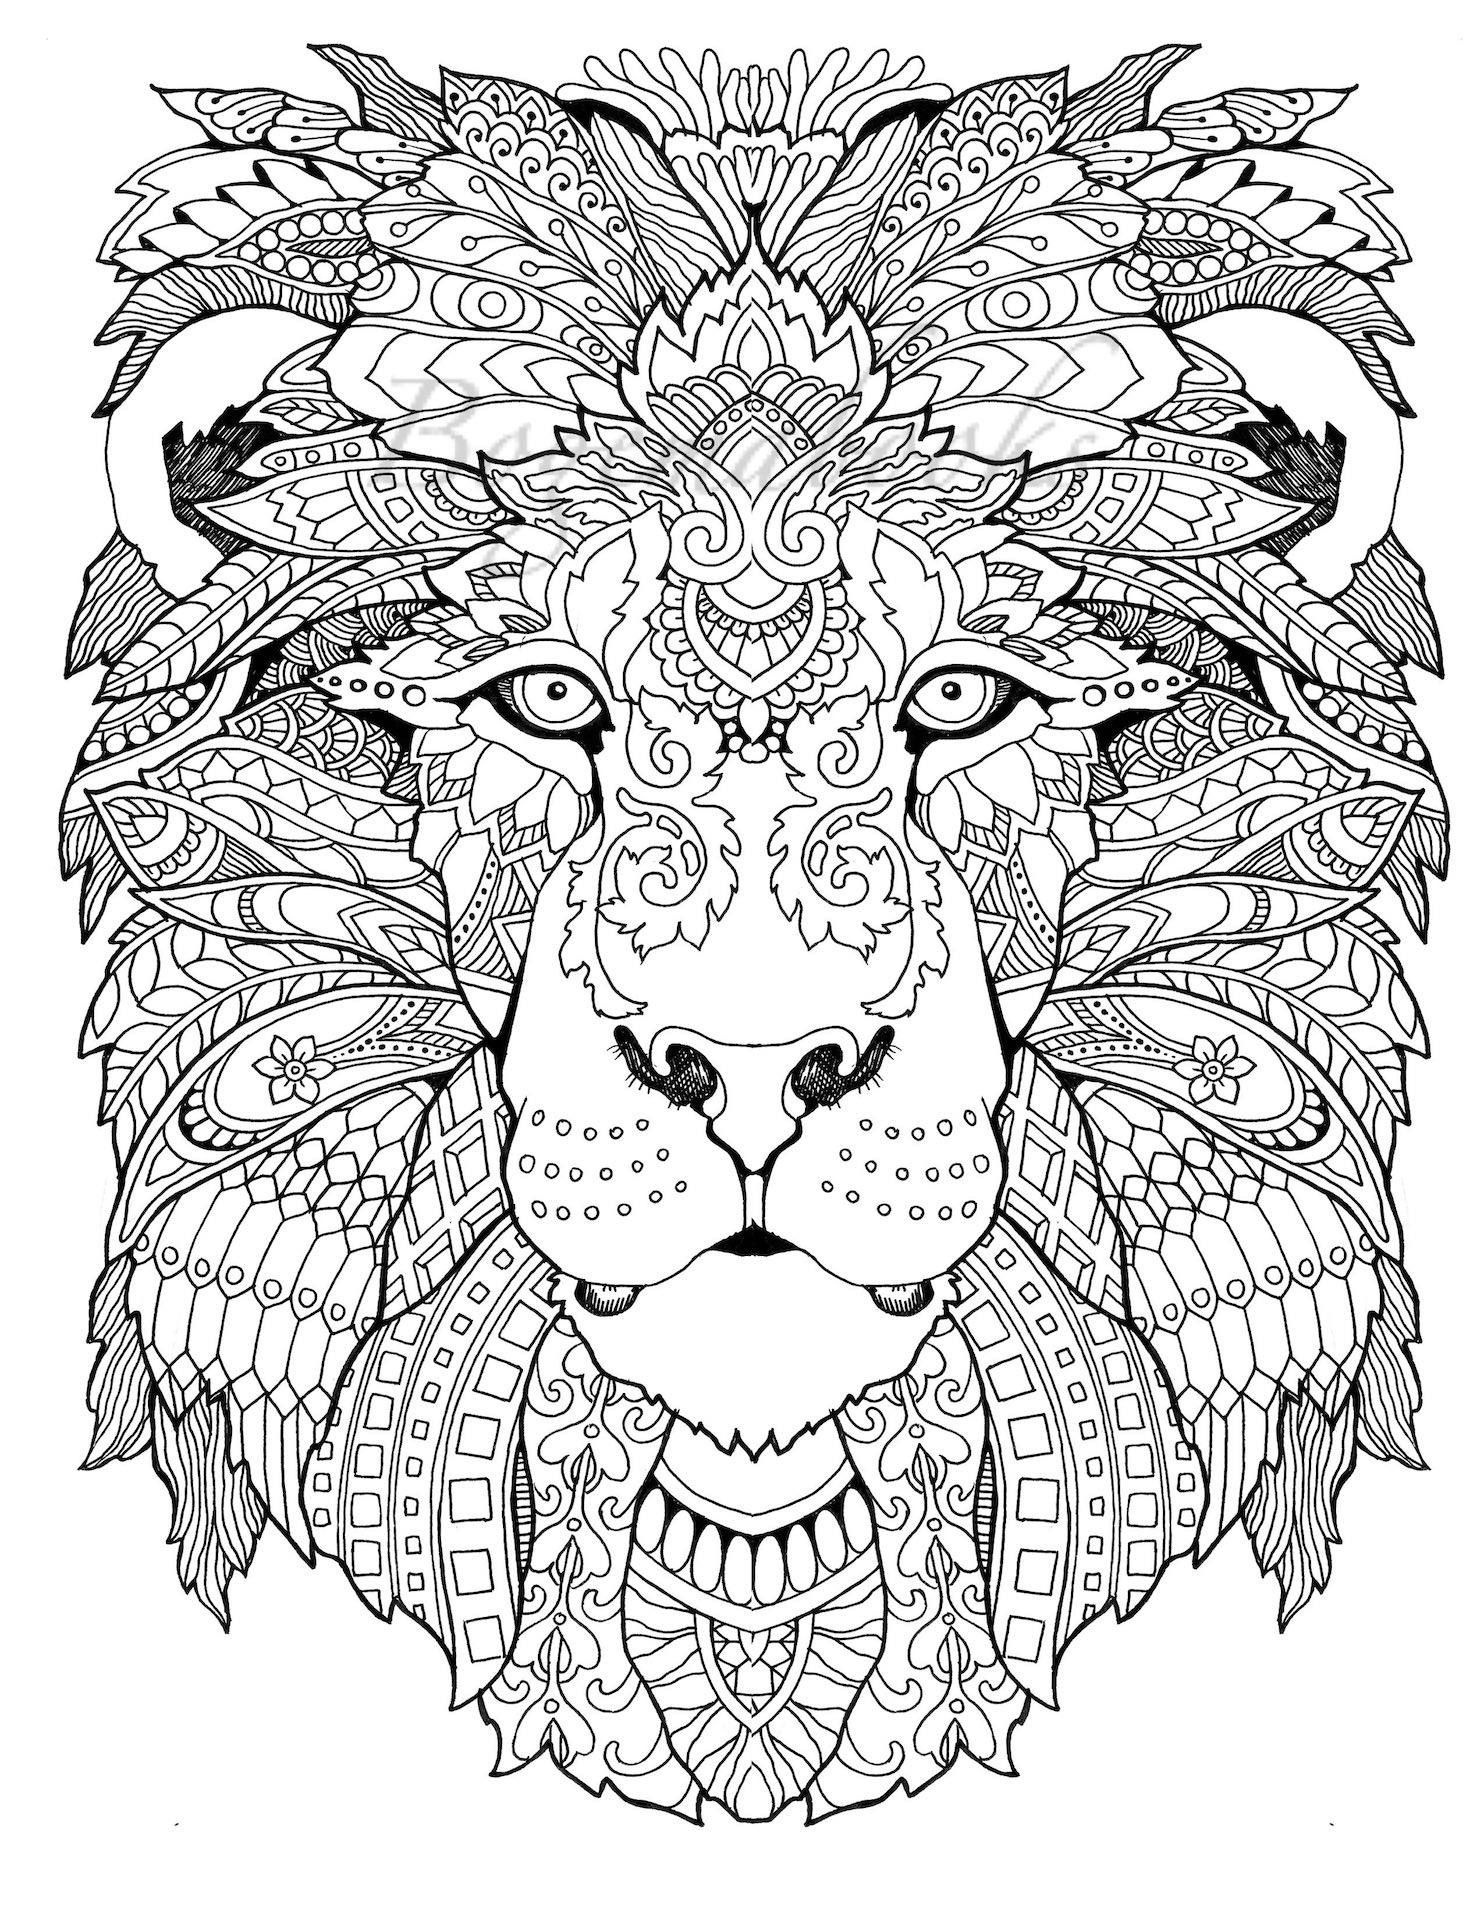 Awesome Animals (Adult Coloring Pages, Coloring Pages Printable - Free Printable Coloring Pages For Adults Pdf